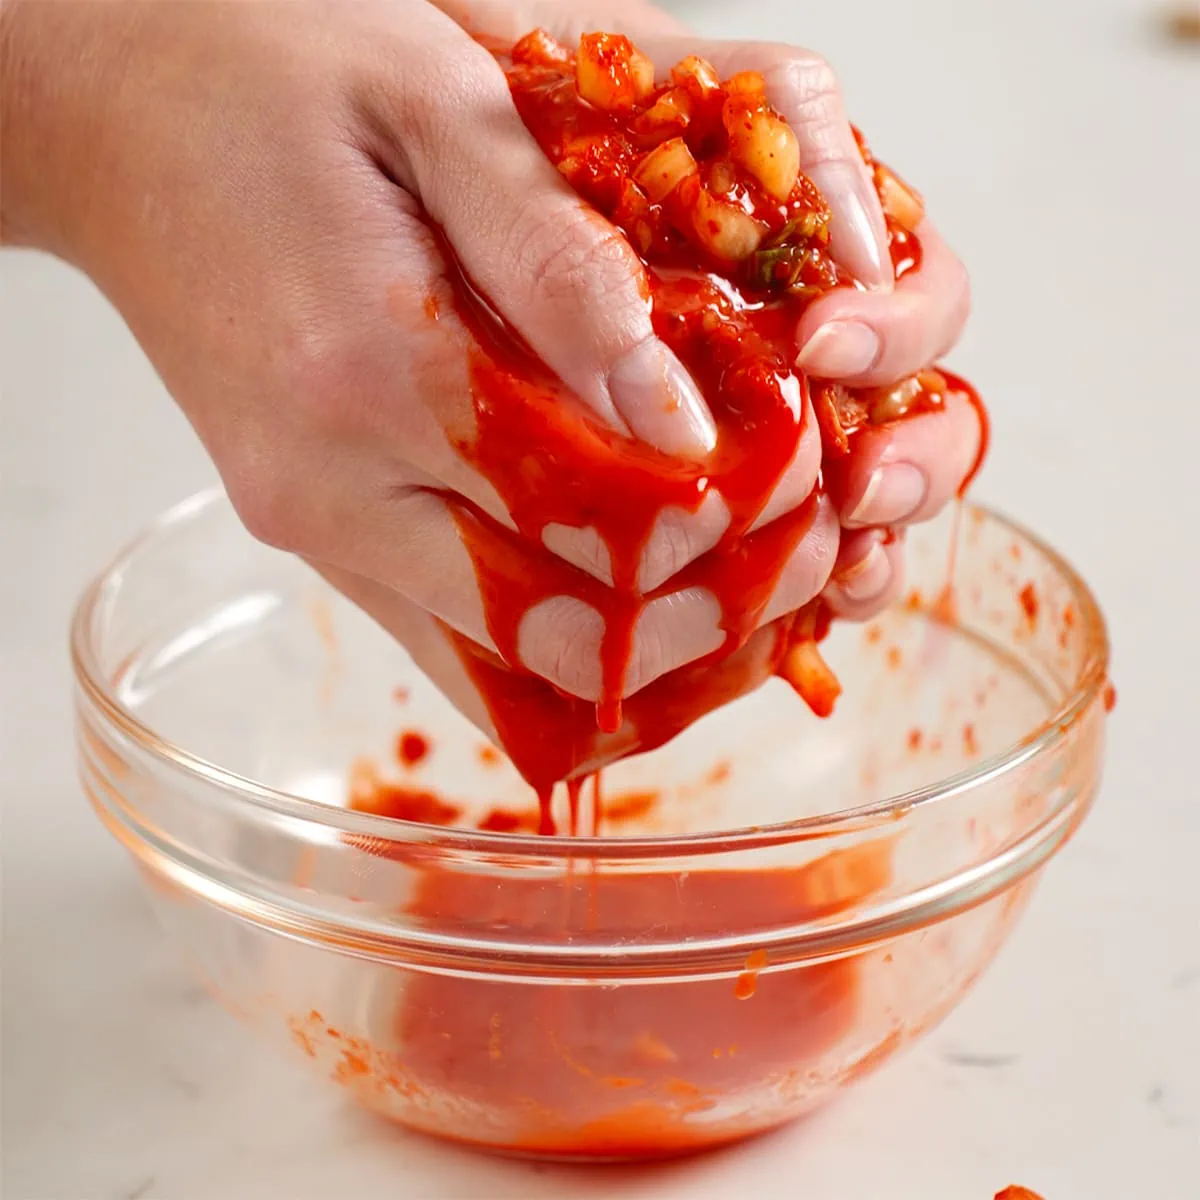 Someone squeezing the water out of chopped kimchi.